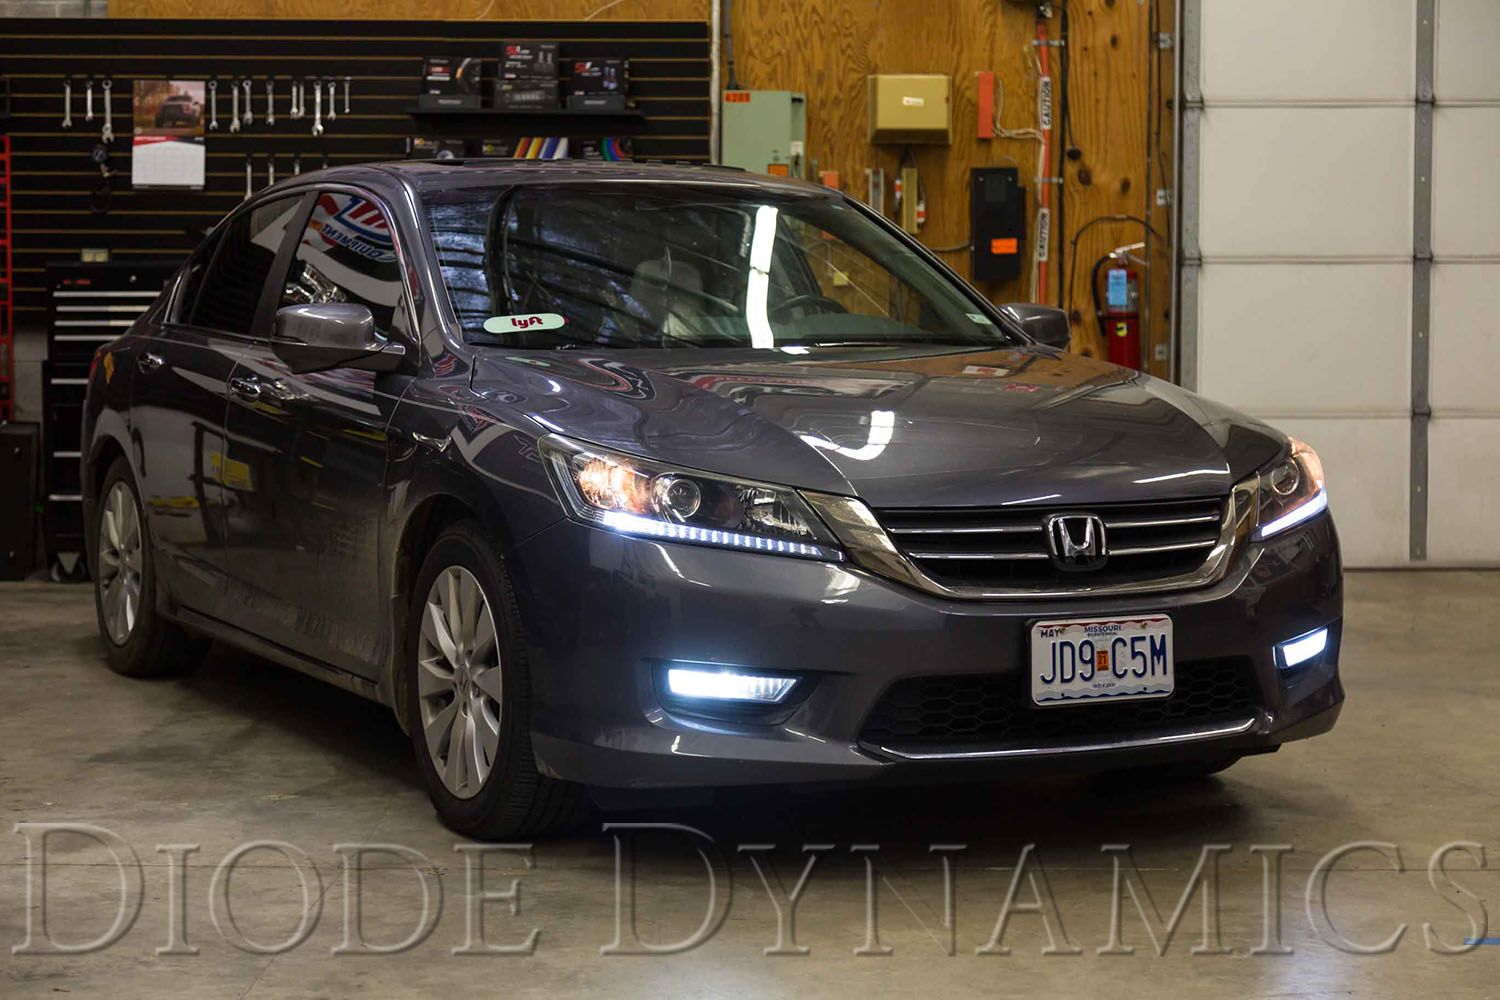 Top LED Lighting Upgrades for the 2013-2019 Honda Accord